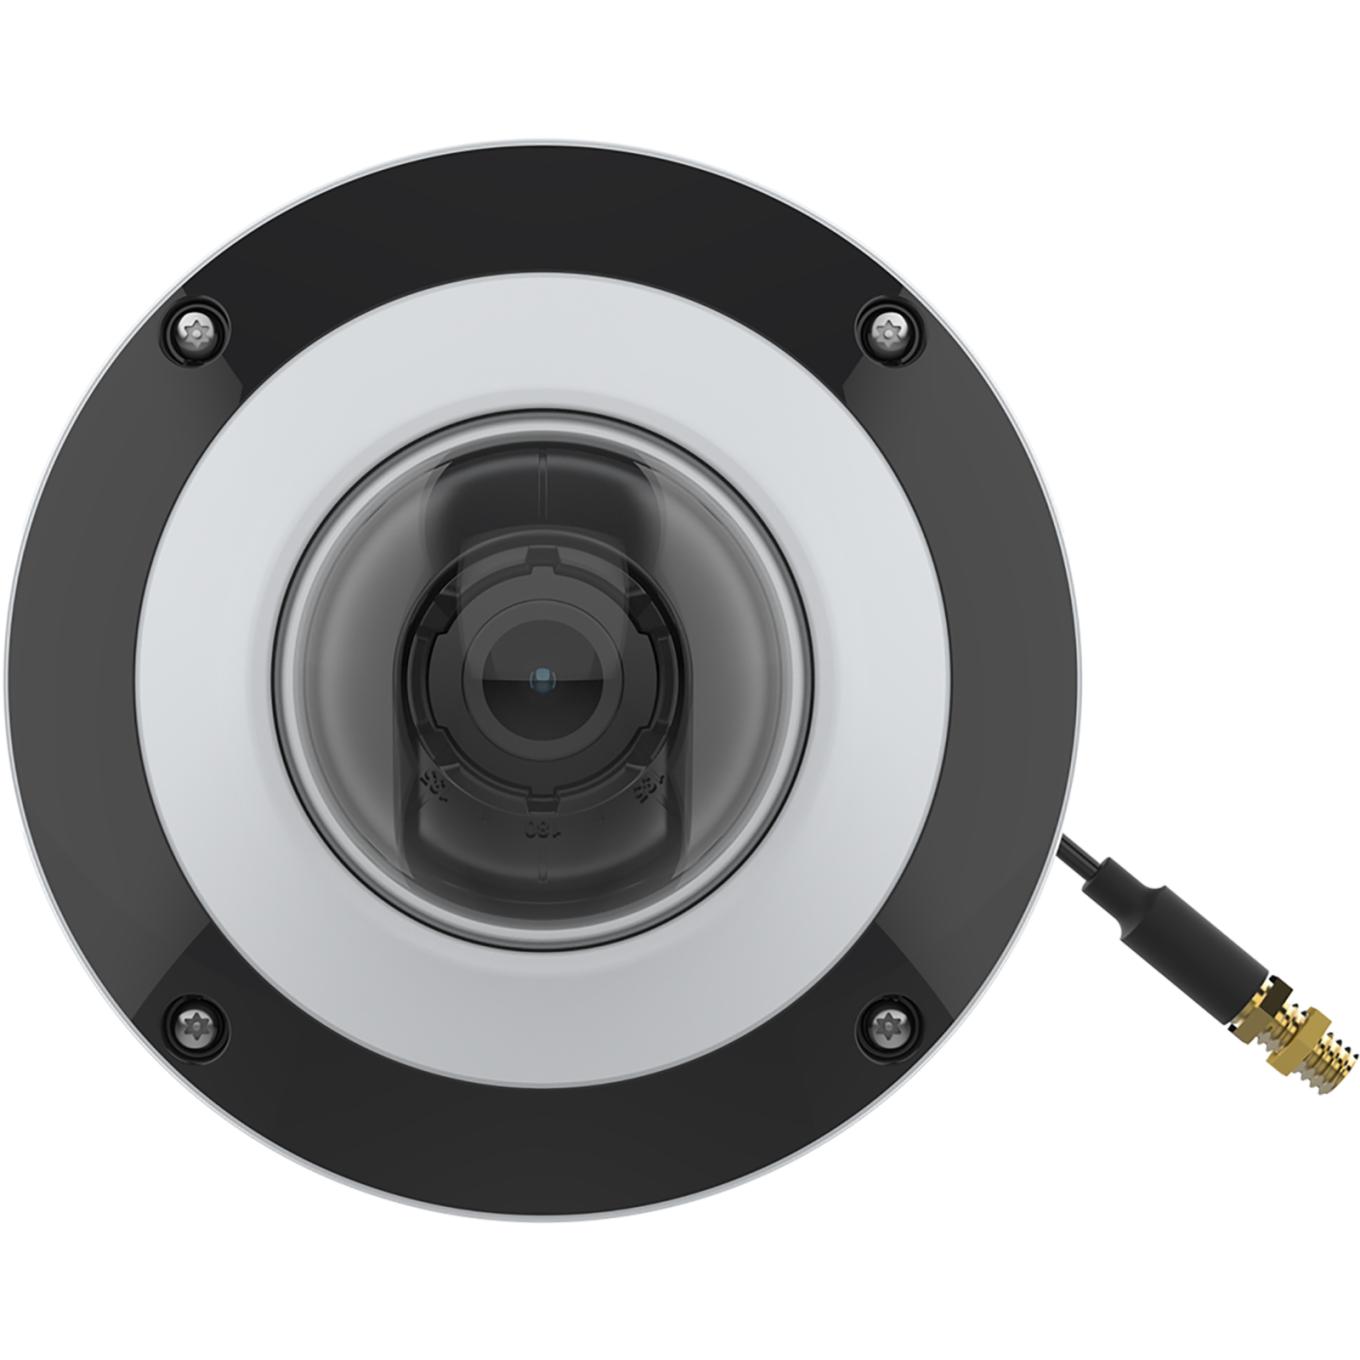 AXIS F4105-LRE Dome Sensor, viewed from its front